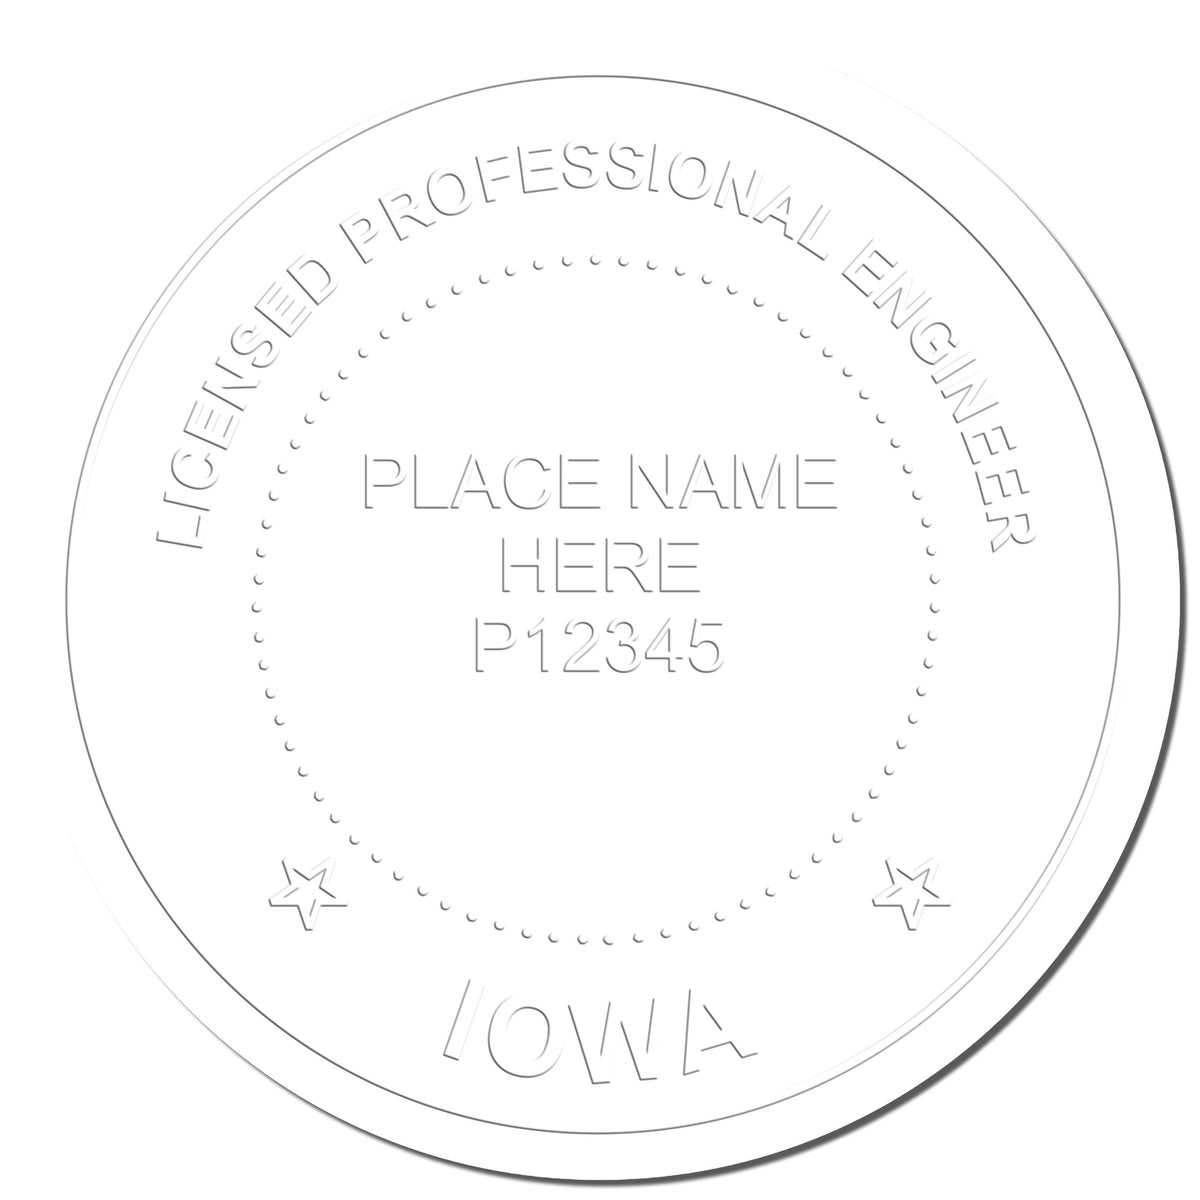 This paper is stamped with a sample imprint of the Heavy Duty Cast Iron Iowa Engineer Seal Embosser, signifying its quality and reliability.